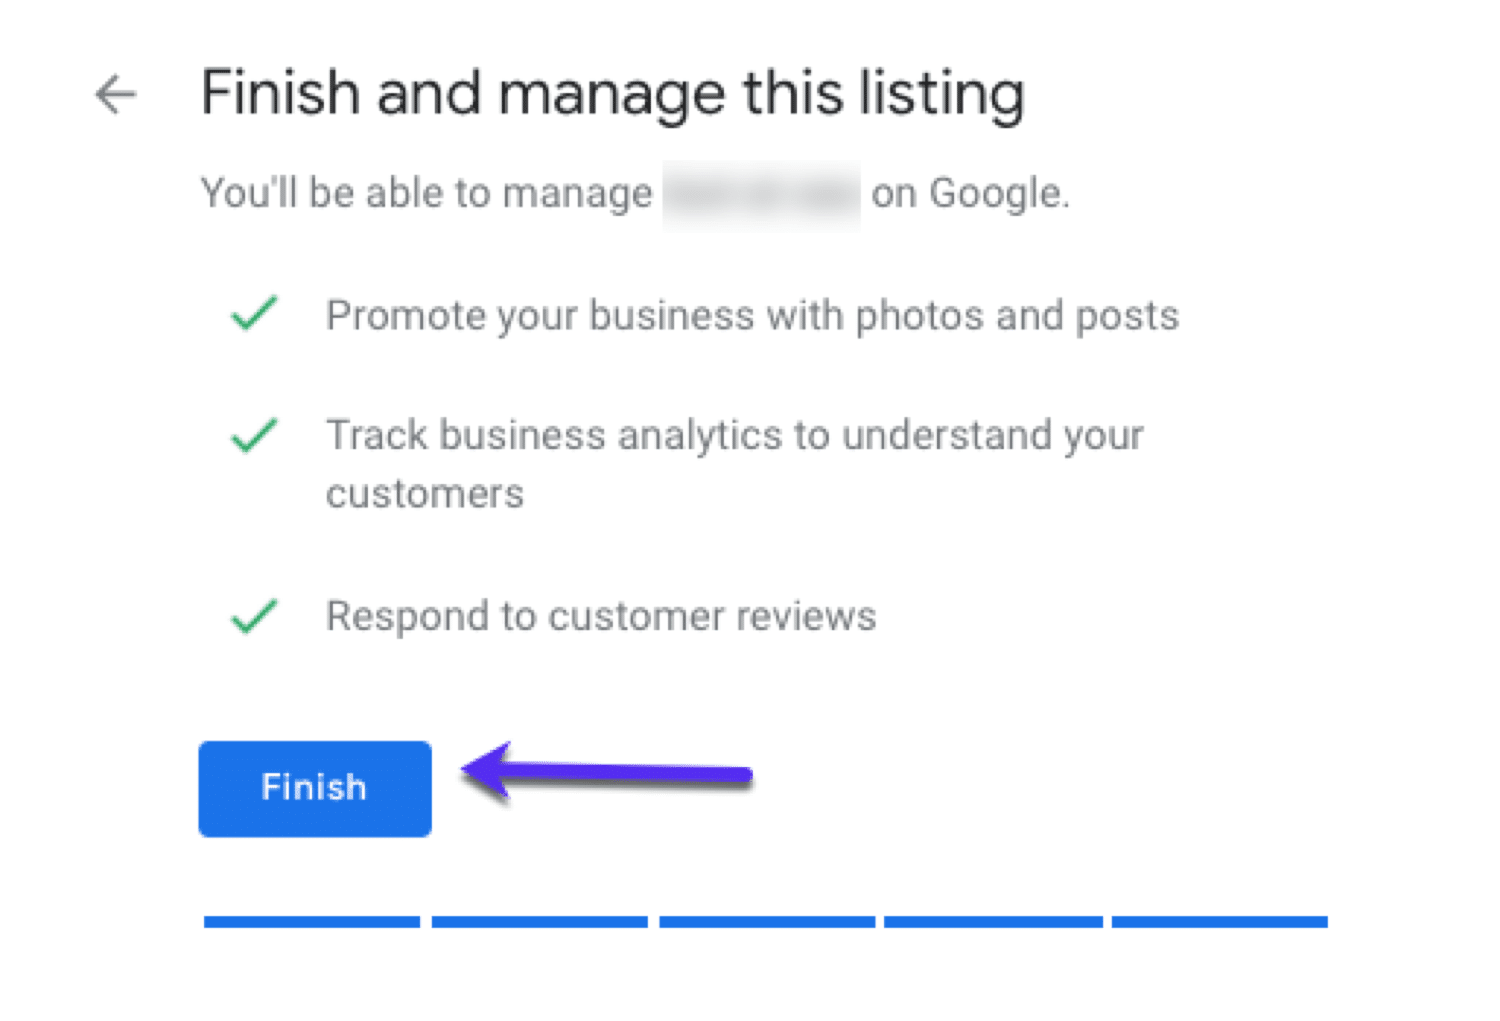 Finish and manage your GMB listing